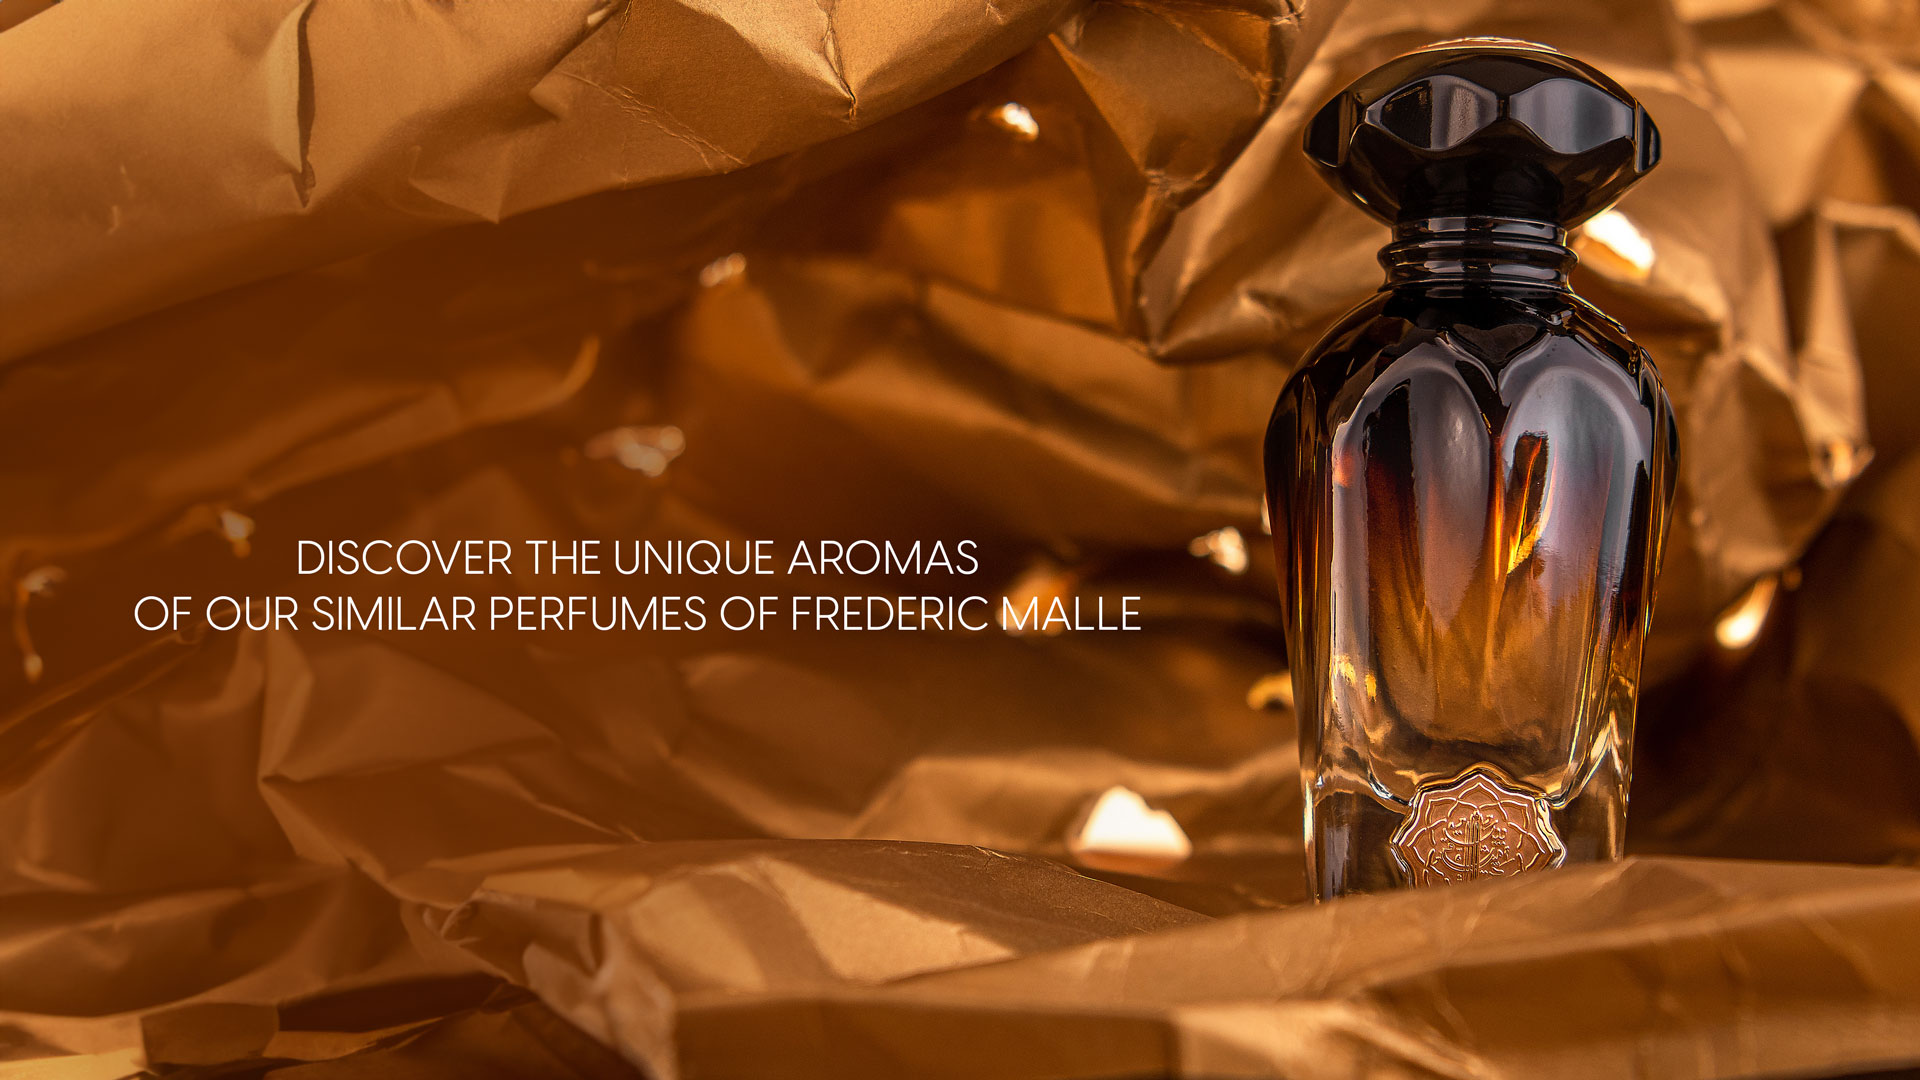 Discover the Rich and Unique Aromas of Our Similar Perfumes of Frederic Malle